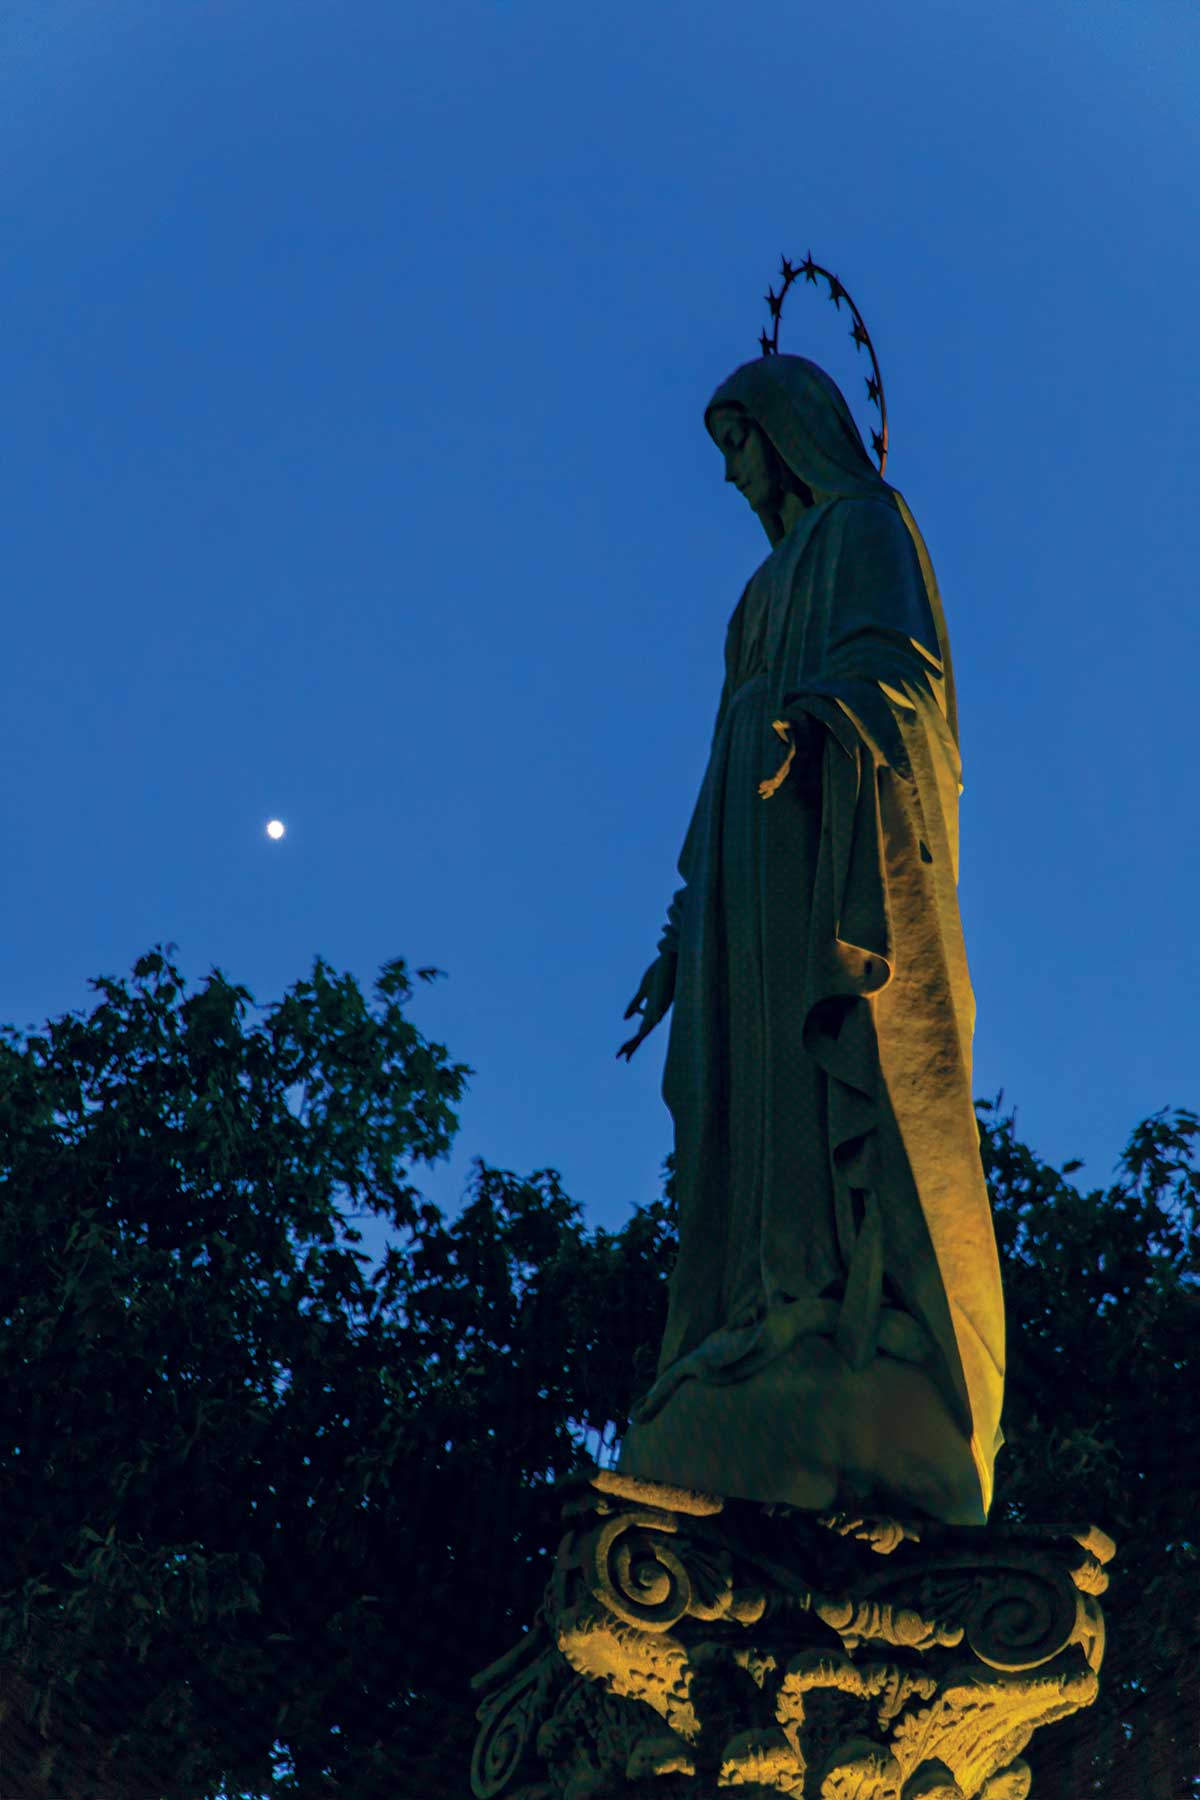 A star hangs in the sky right behind the statue of Mary on campus.